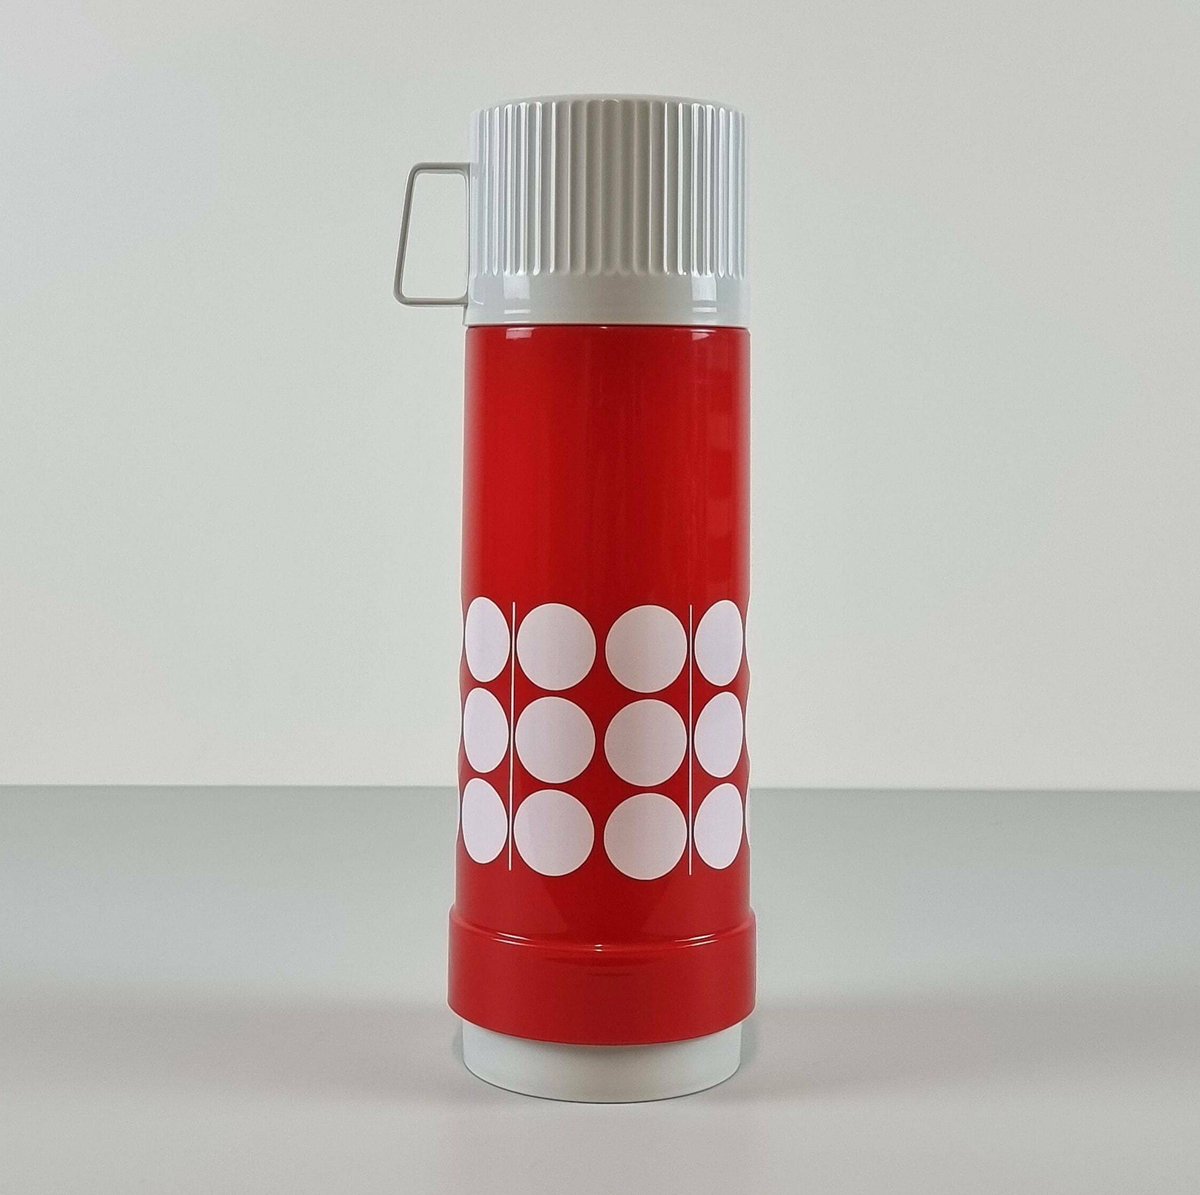 1970s' Rotpunkt Durotherm Vacuum Flask by Dr Zimmermann - Germany